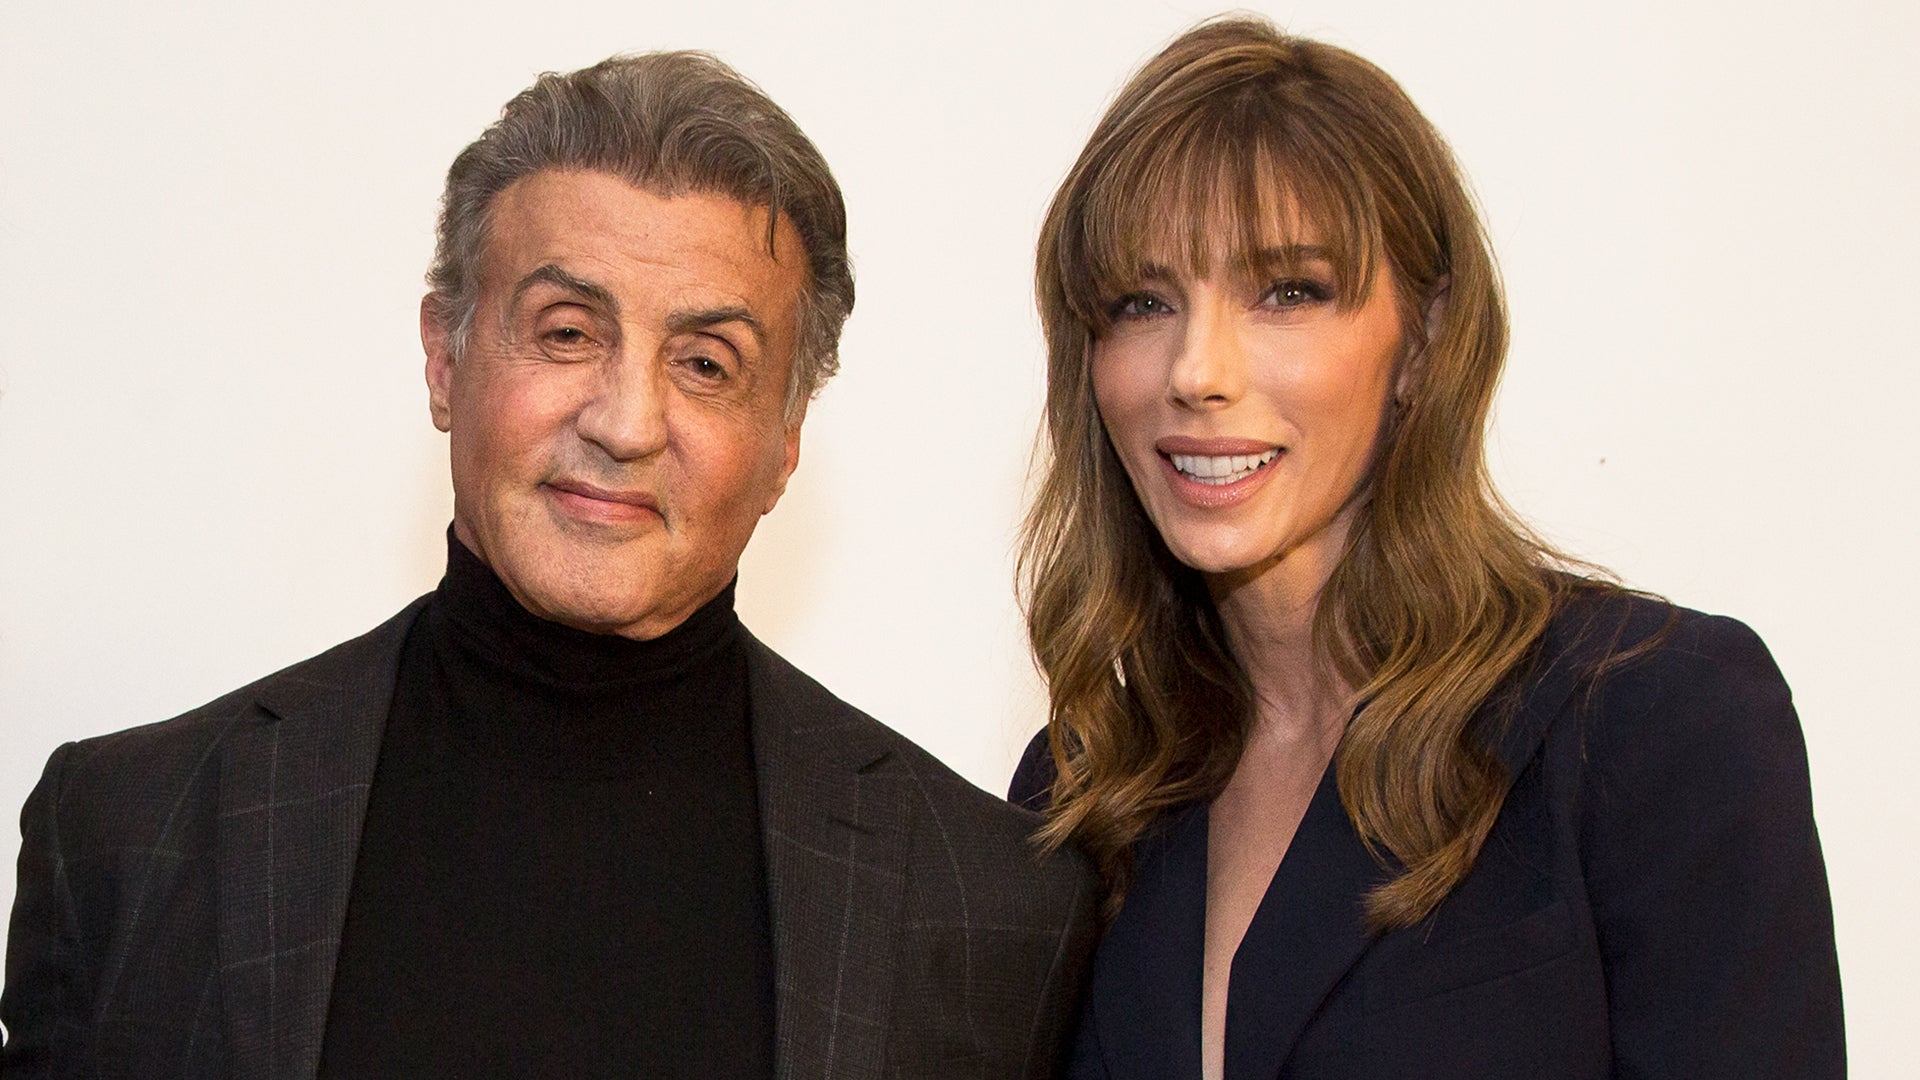 Sylvester Stallone and Wife Jennifer Flavin Hold Hands Amid Divorce in Instagram Pic Entertainment Tonight